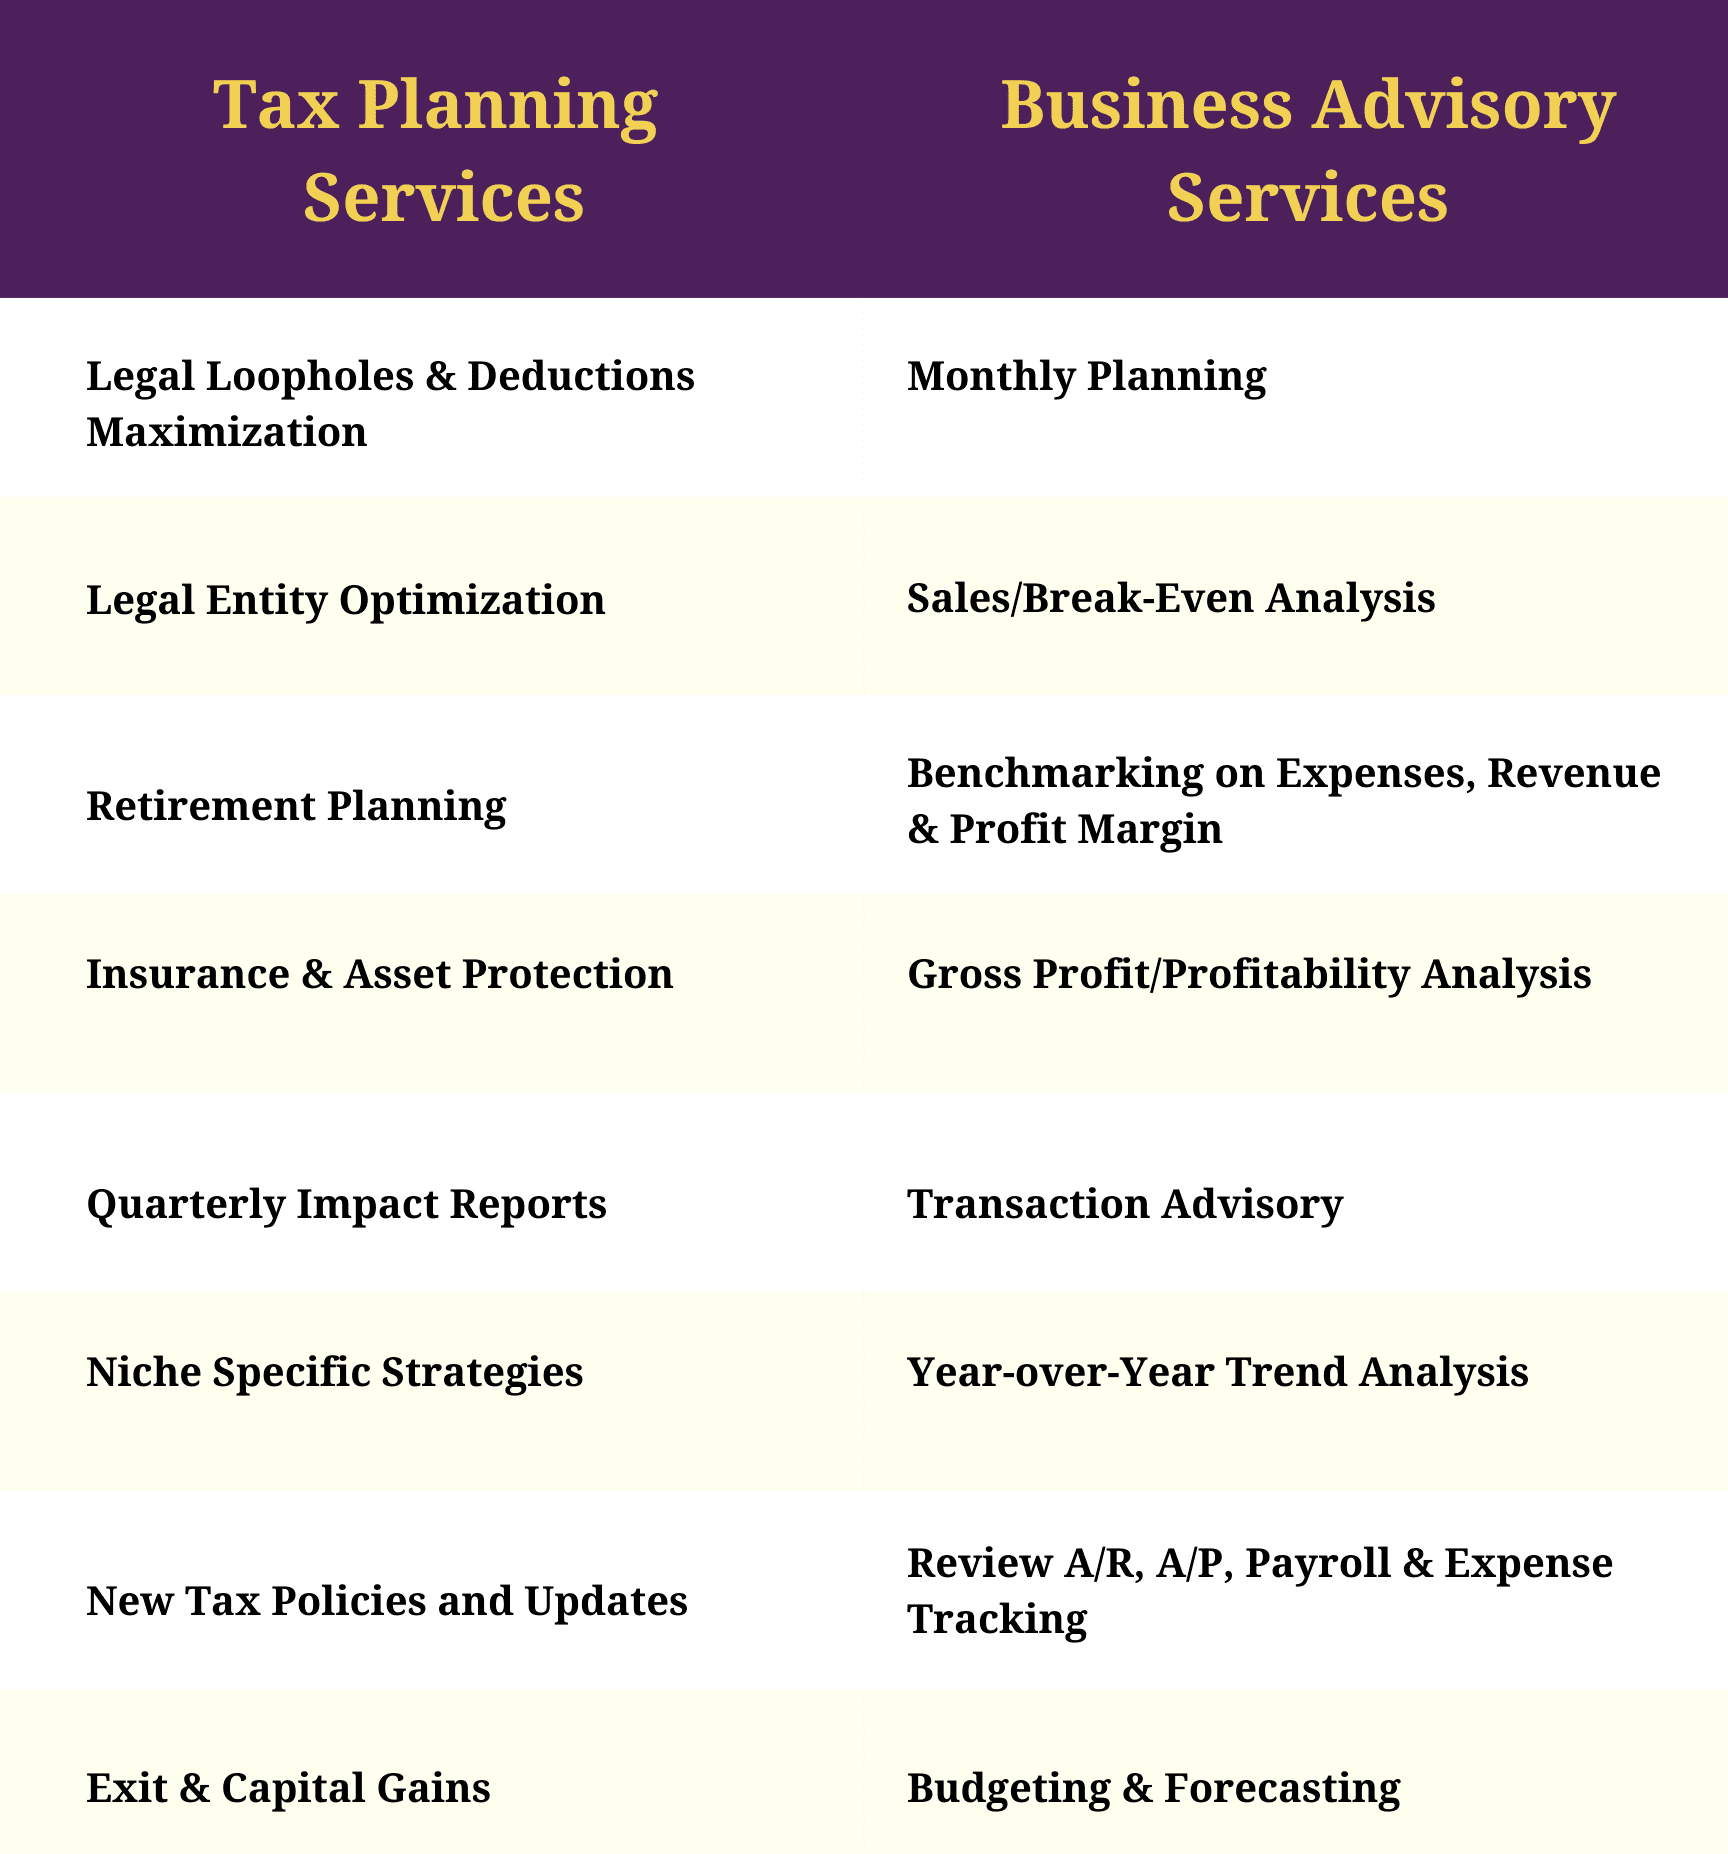 Tax Planning and Business Advisory Services Infographic